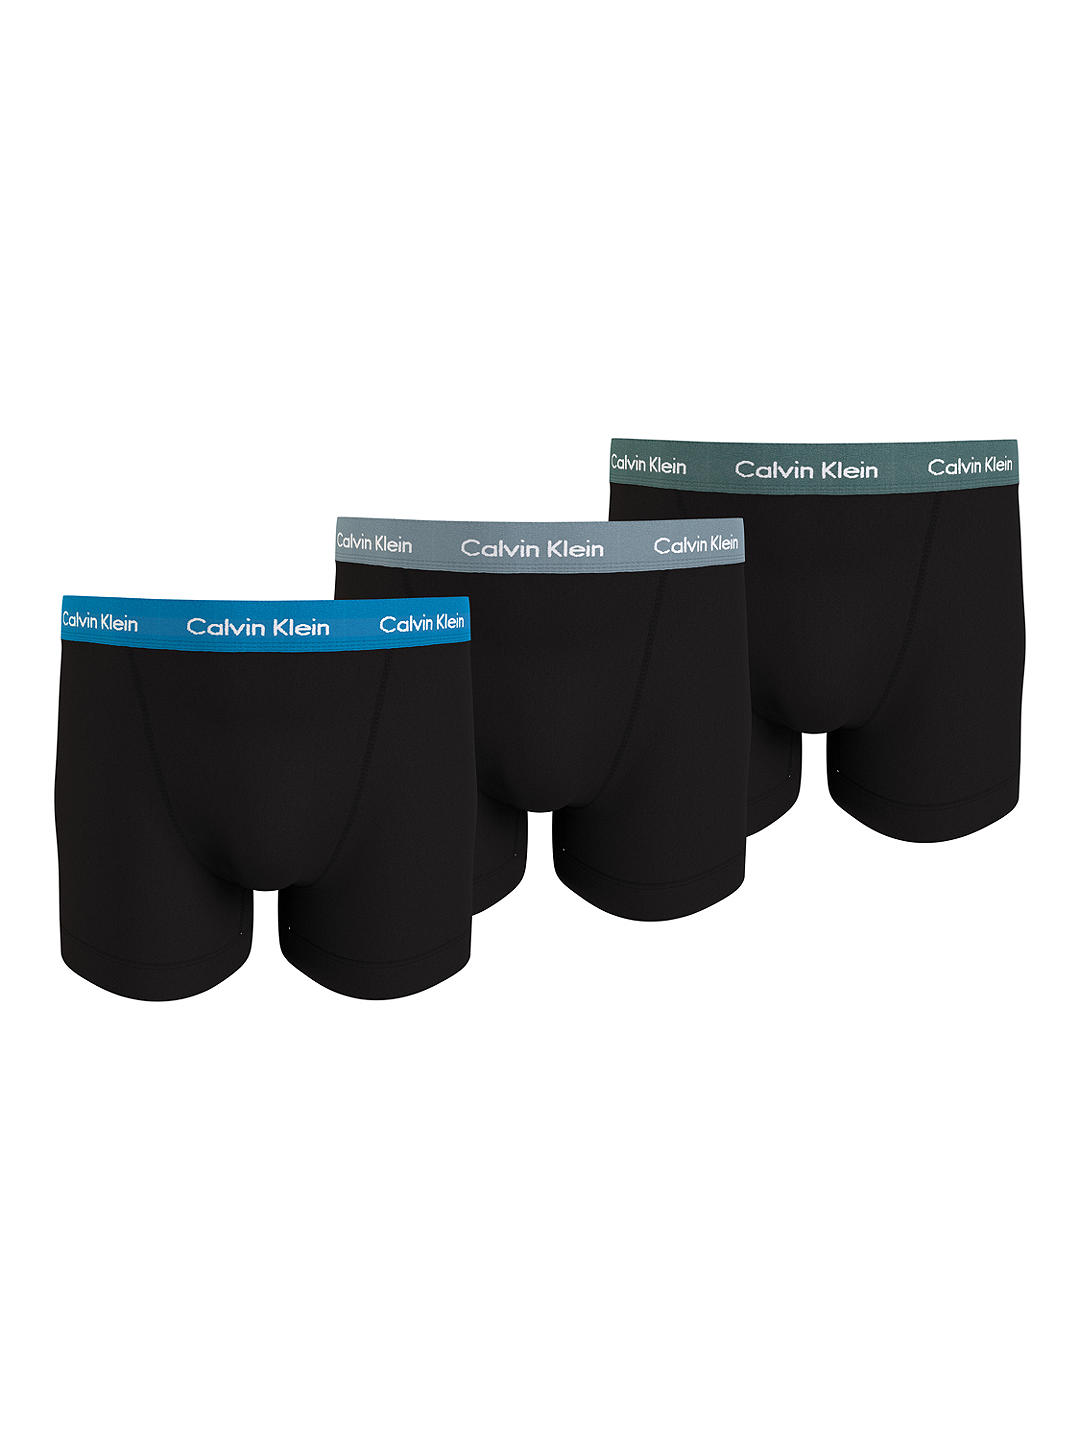 Calvin Klein Cotton Stretch Mid Rise Trunks, Pack of 3, Black/Multi